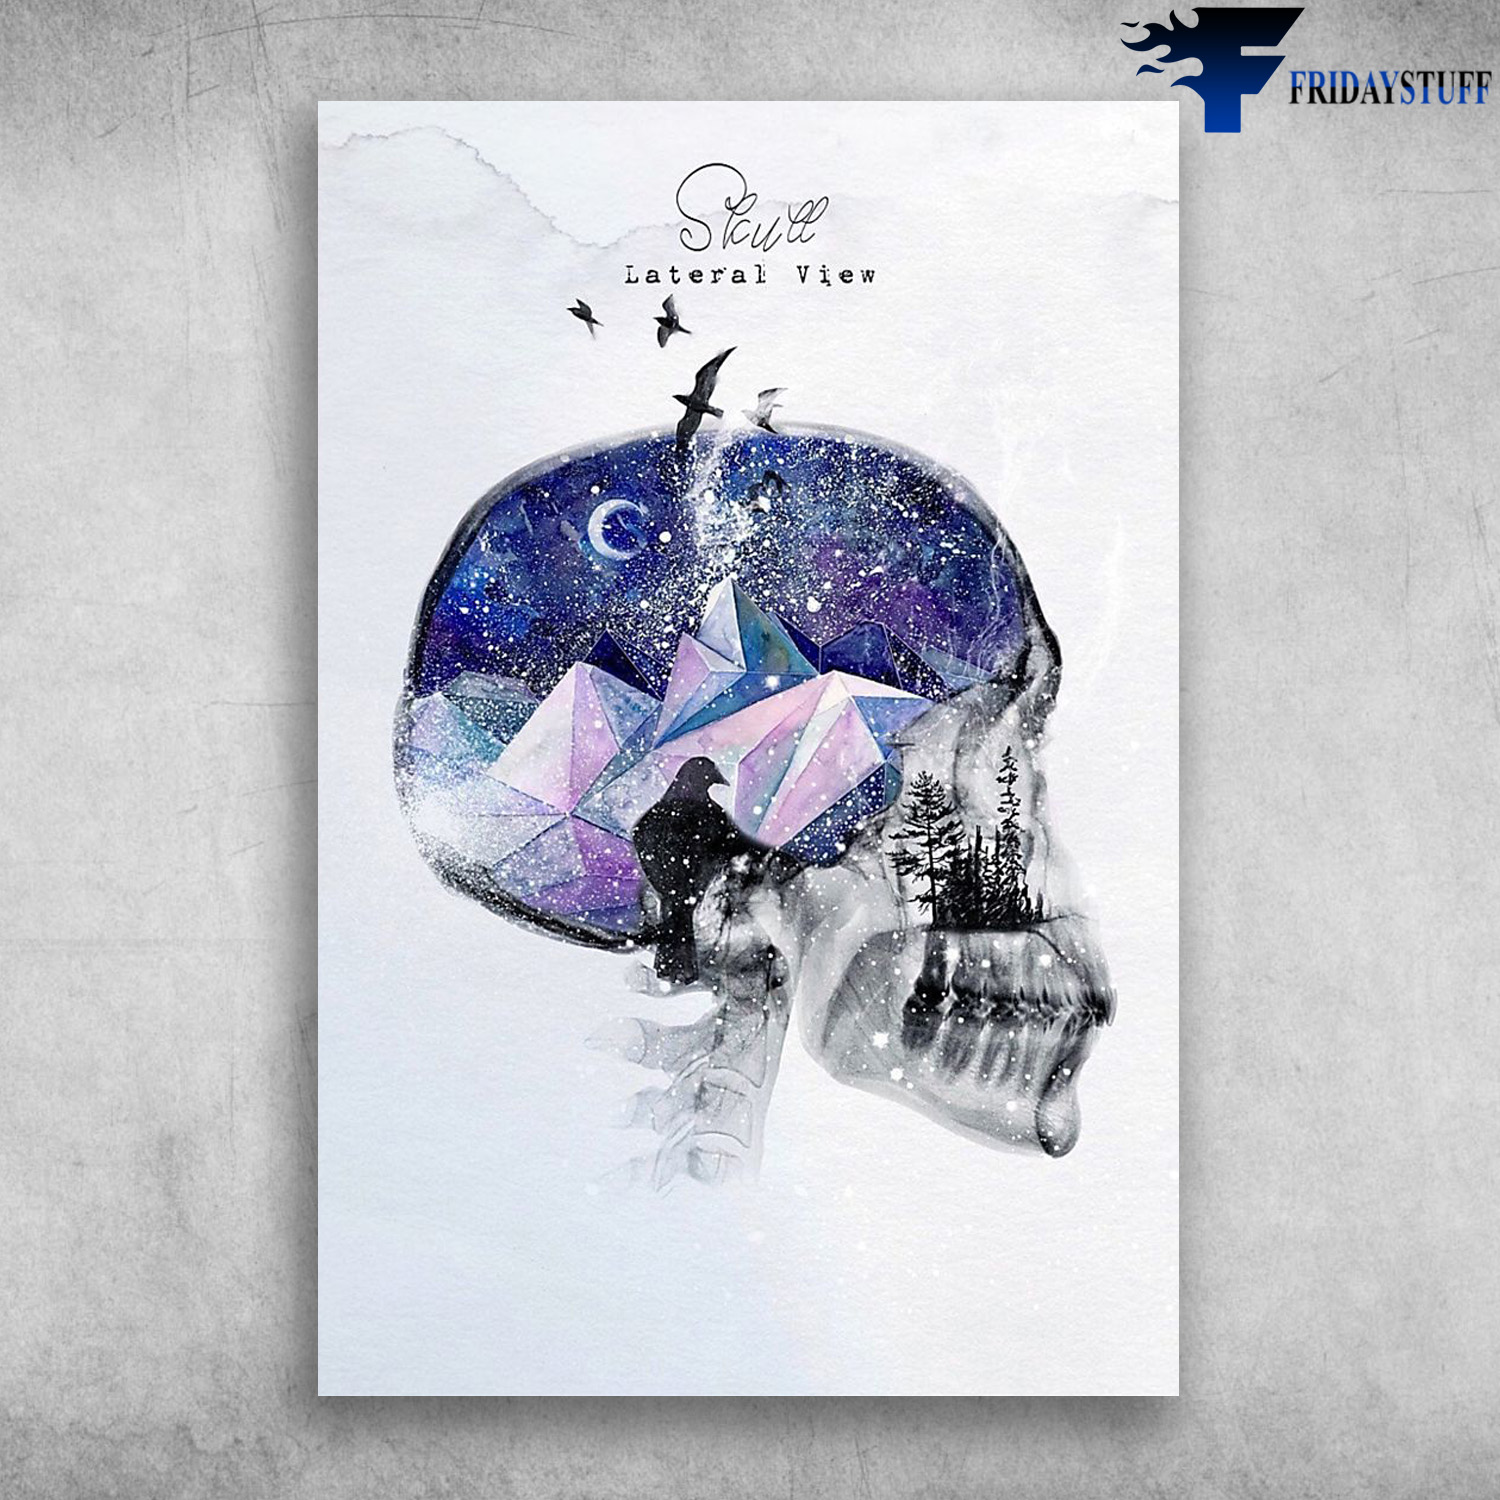 Skull Lateral View Human Skull Anatomy With Magical Night Scenery